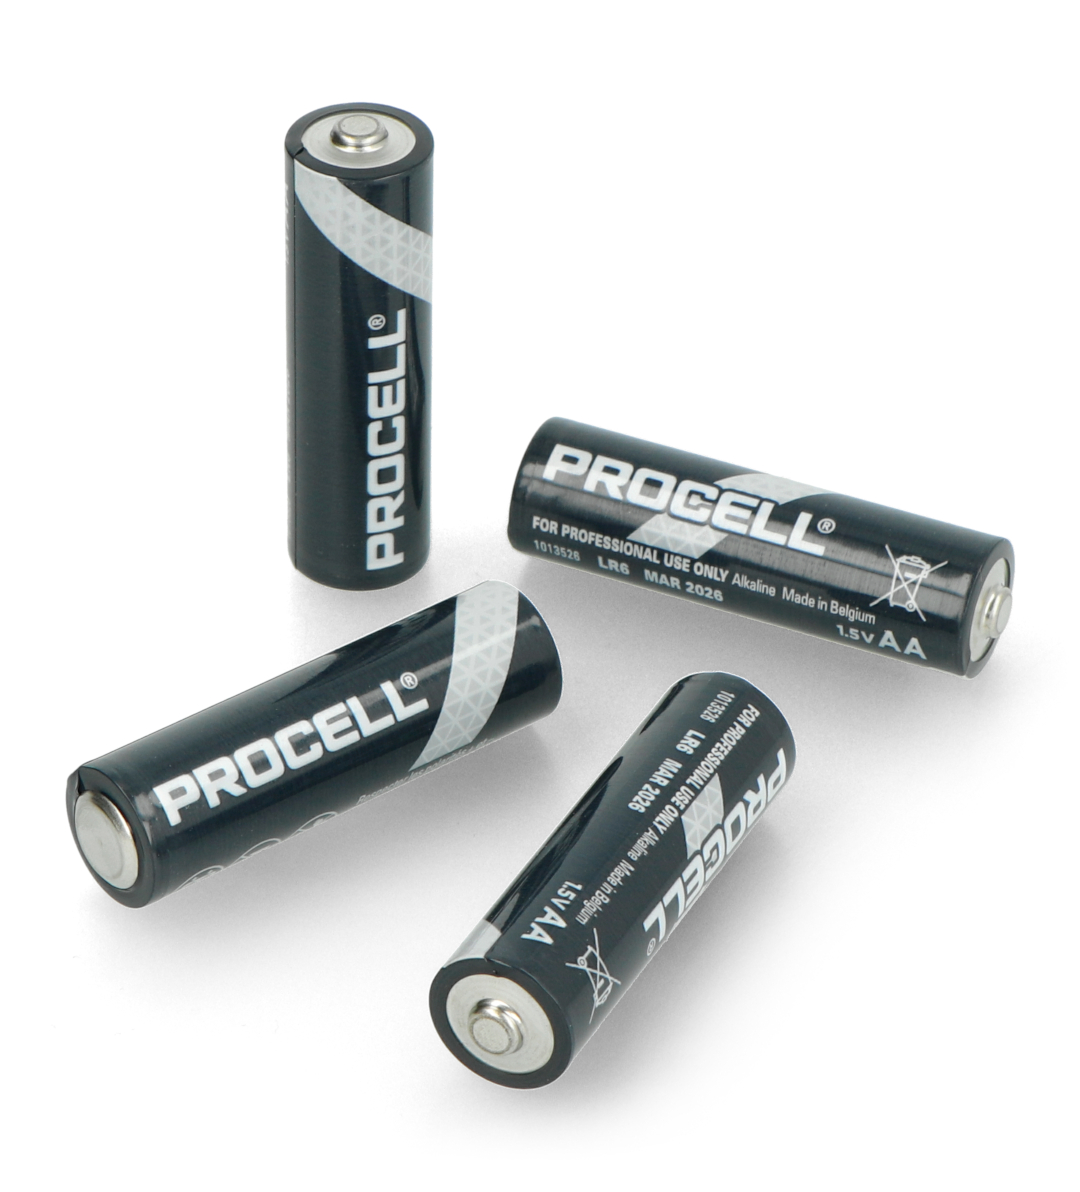 Duracell 1 Duracell Industrial AA Size 1.5V LR6 Alkaline Professional Performance Battery 